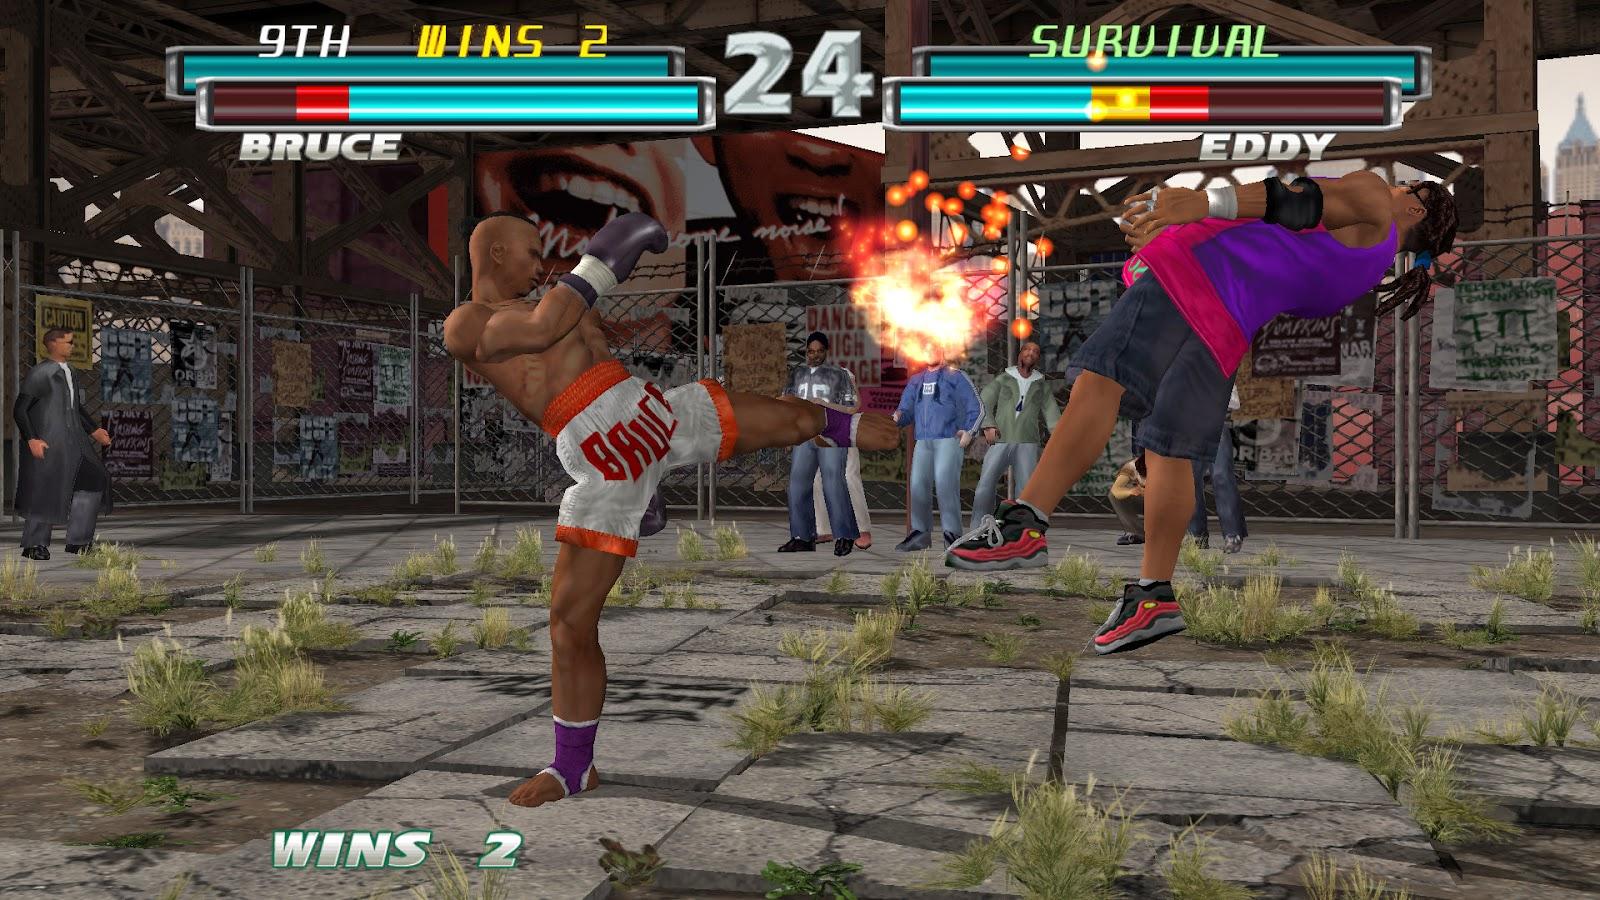 tekken tag tournament 2 free download for android mobile